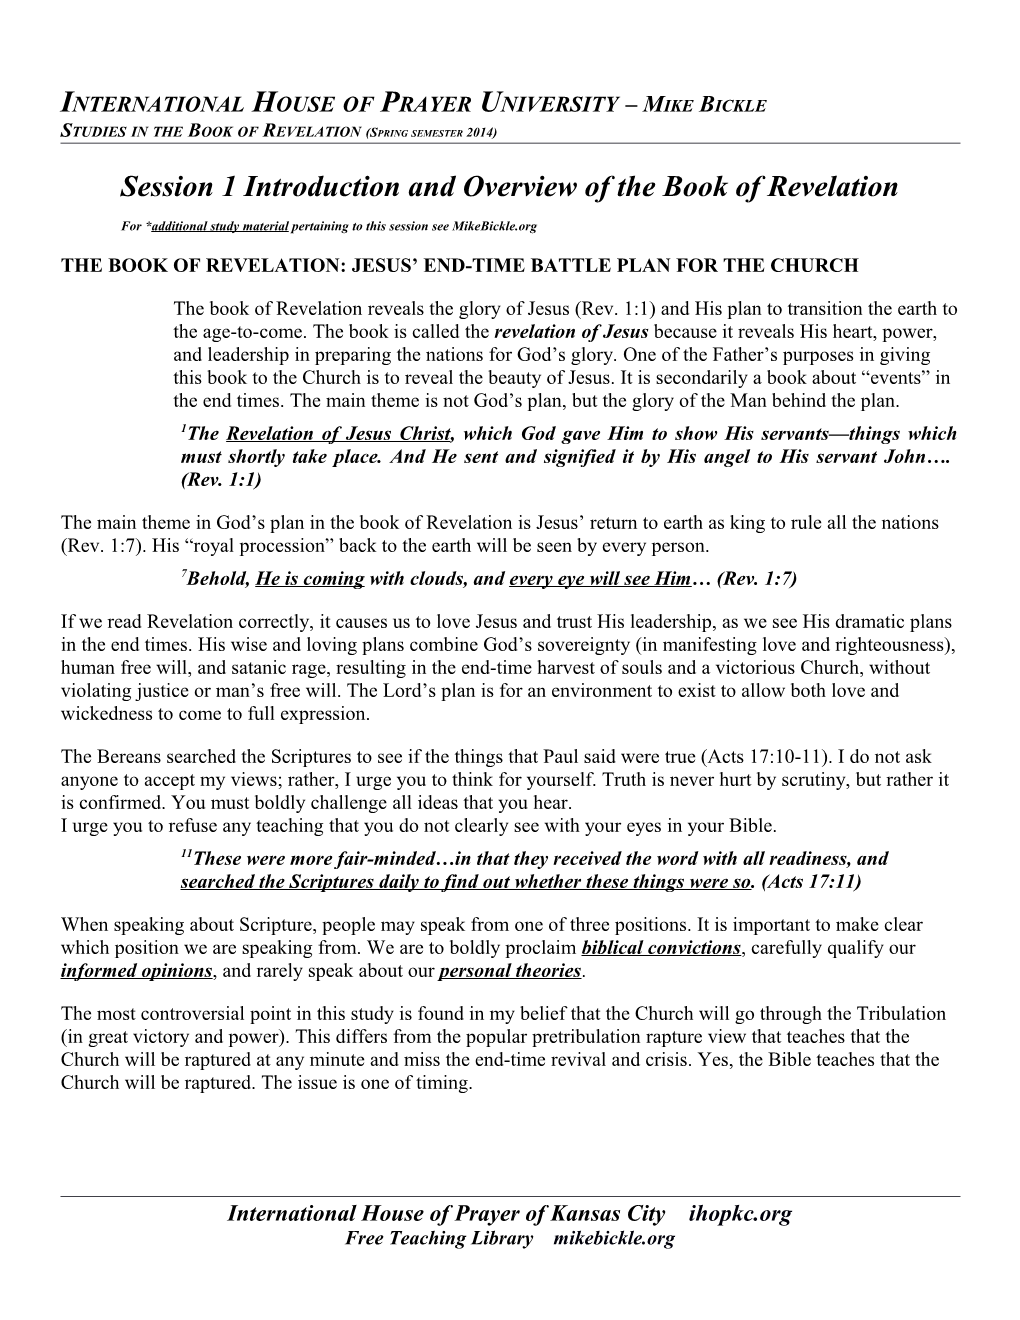 Session 1 Introduction and Overview of the Book of Revelation